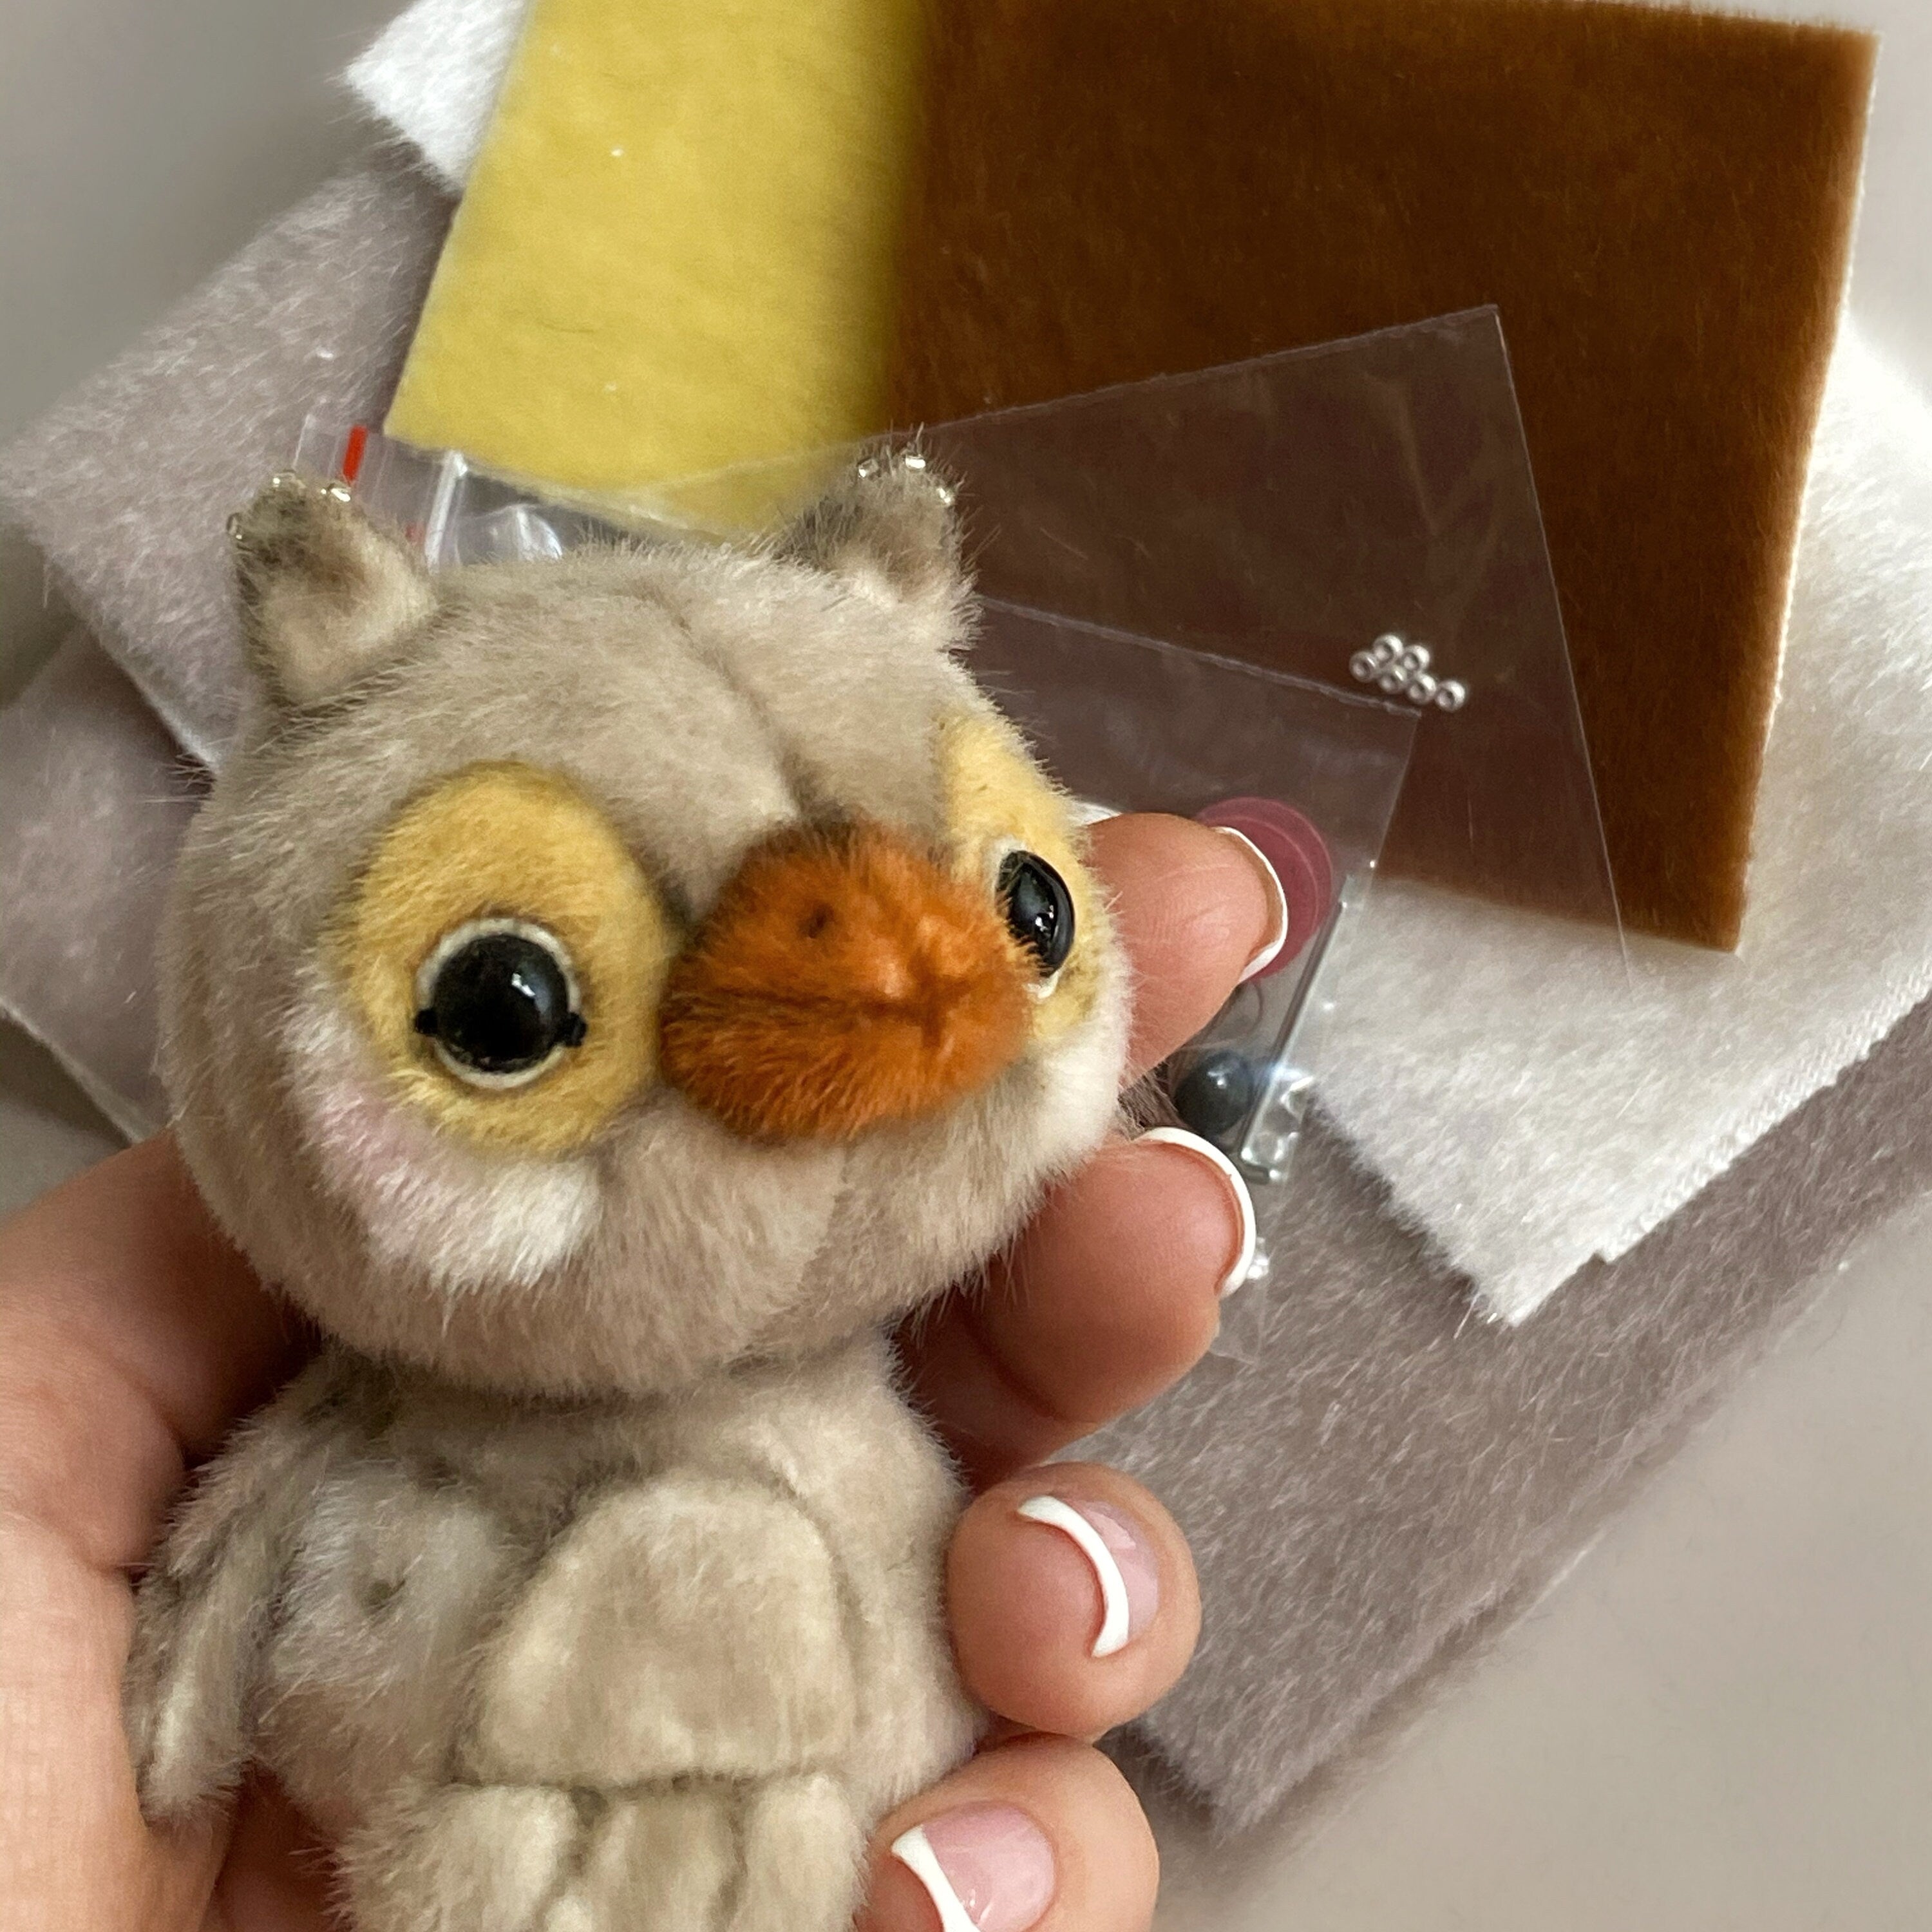 Owl - Sewing KIT, stuffed toy bird diy, gift for creative person, sewing pattern, how to make a toy, Christmas toy on the tree